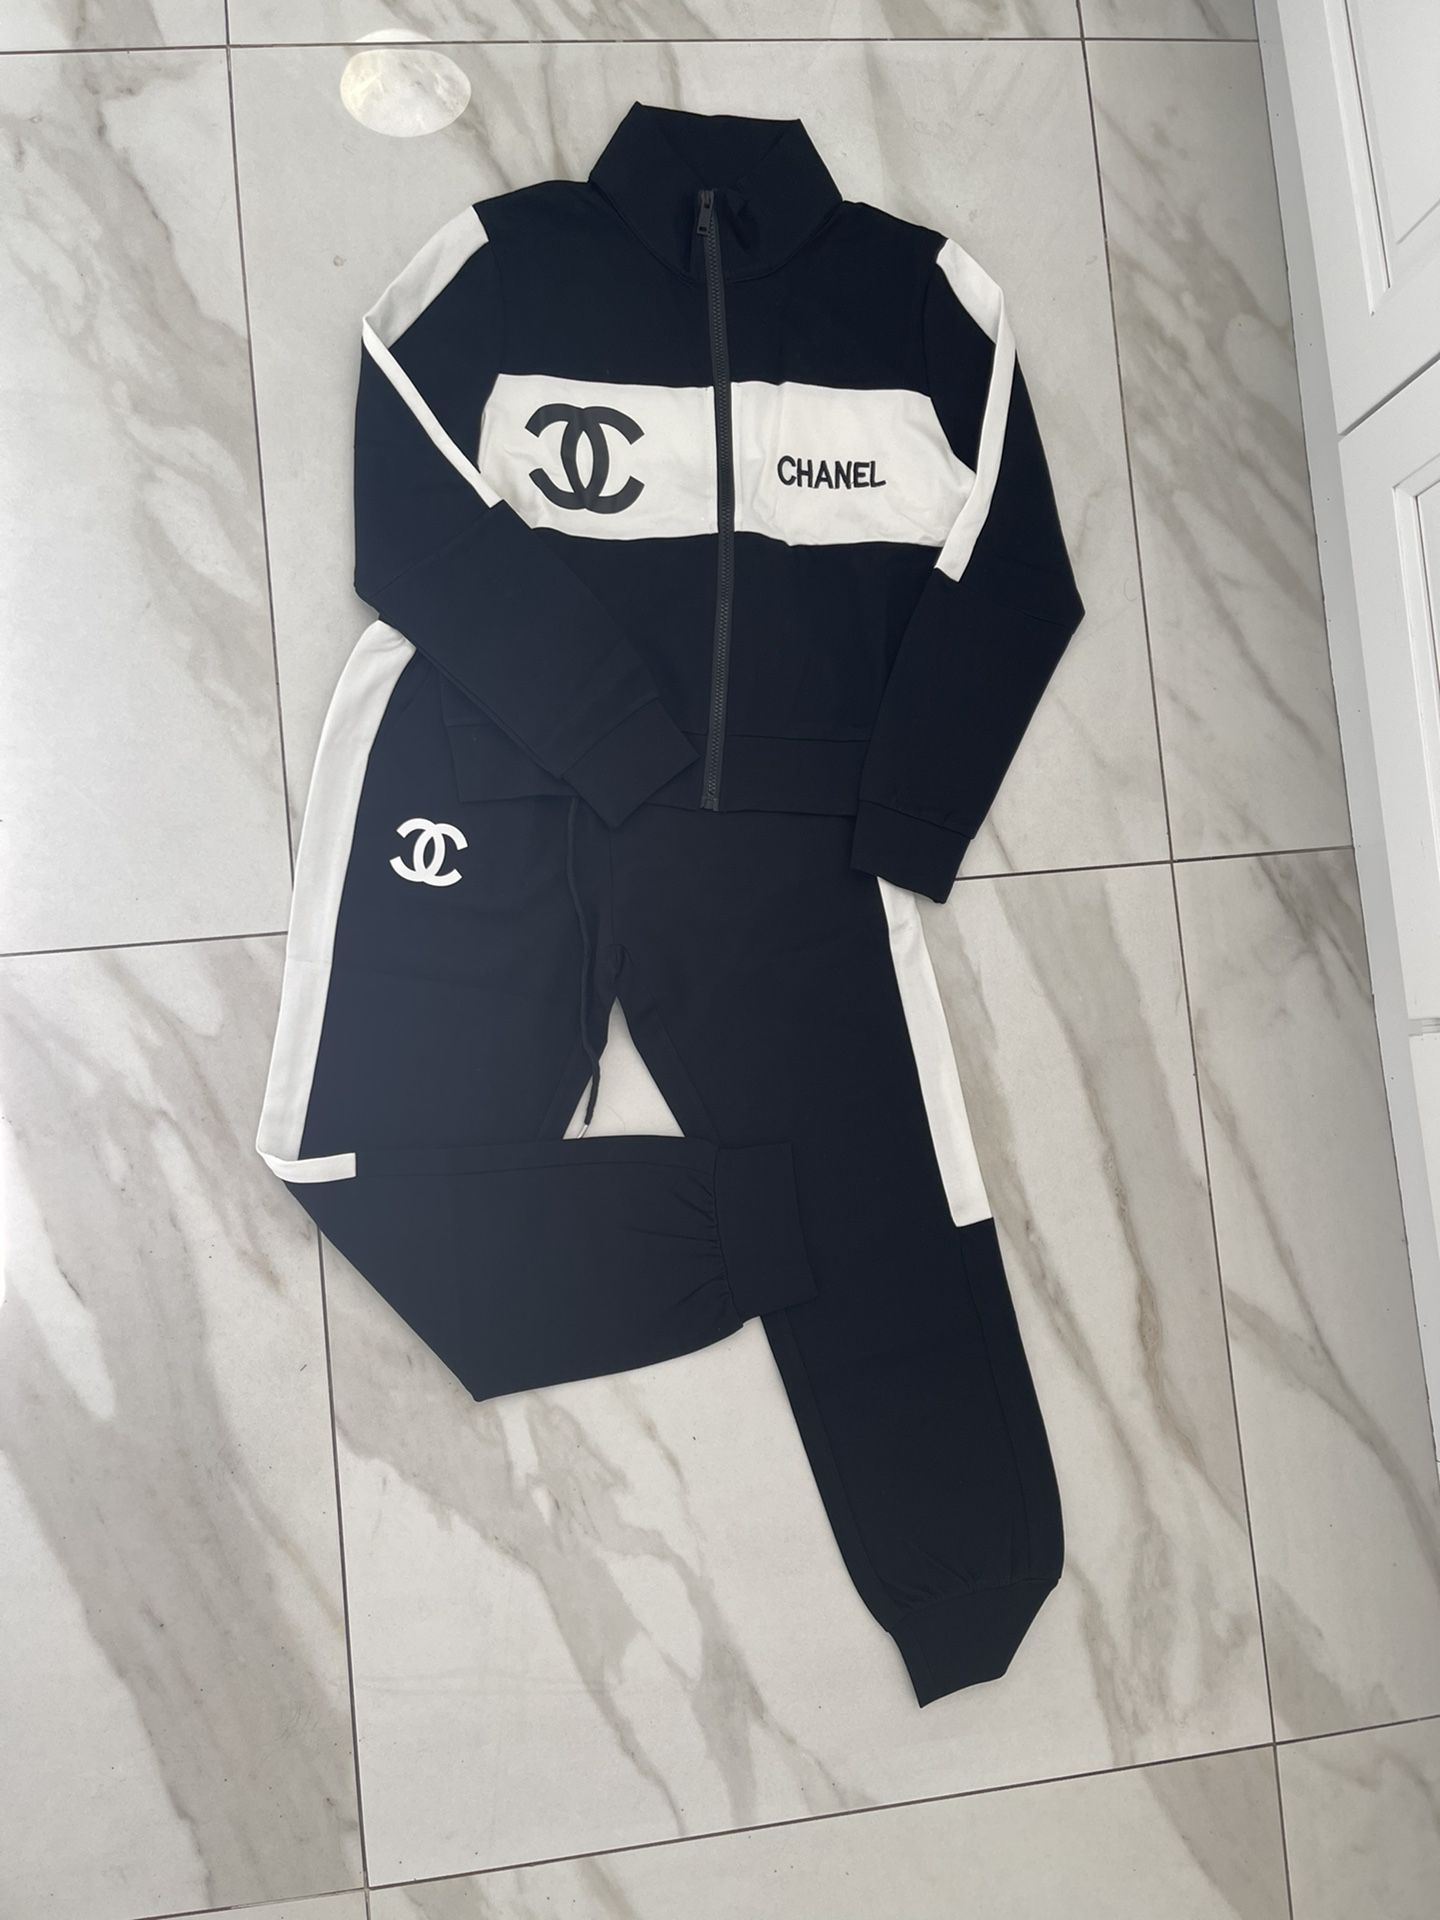 Chanel Tracksuit for Sale in Los Angeles, CA - OfferUp